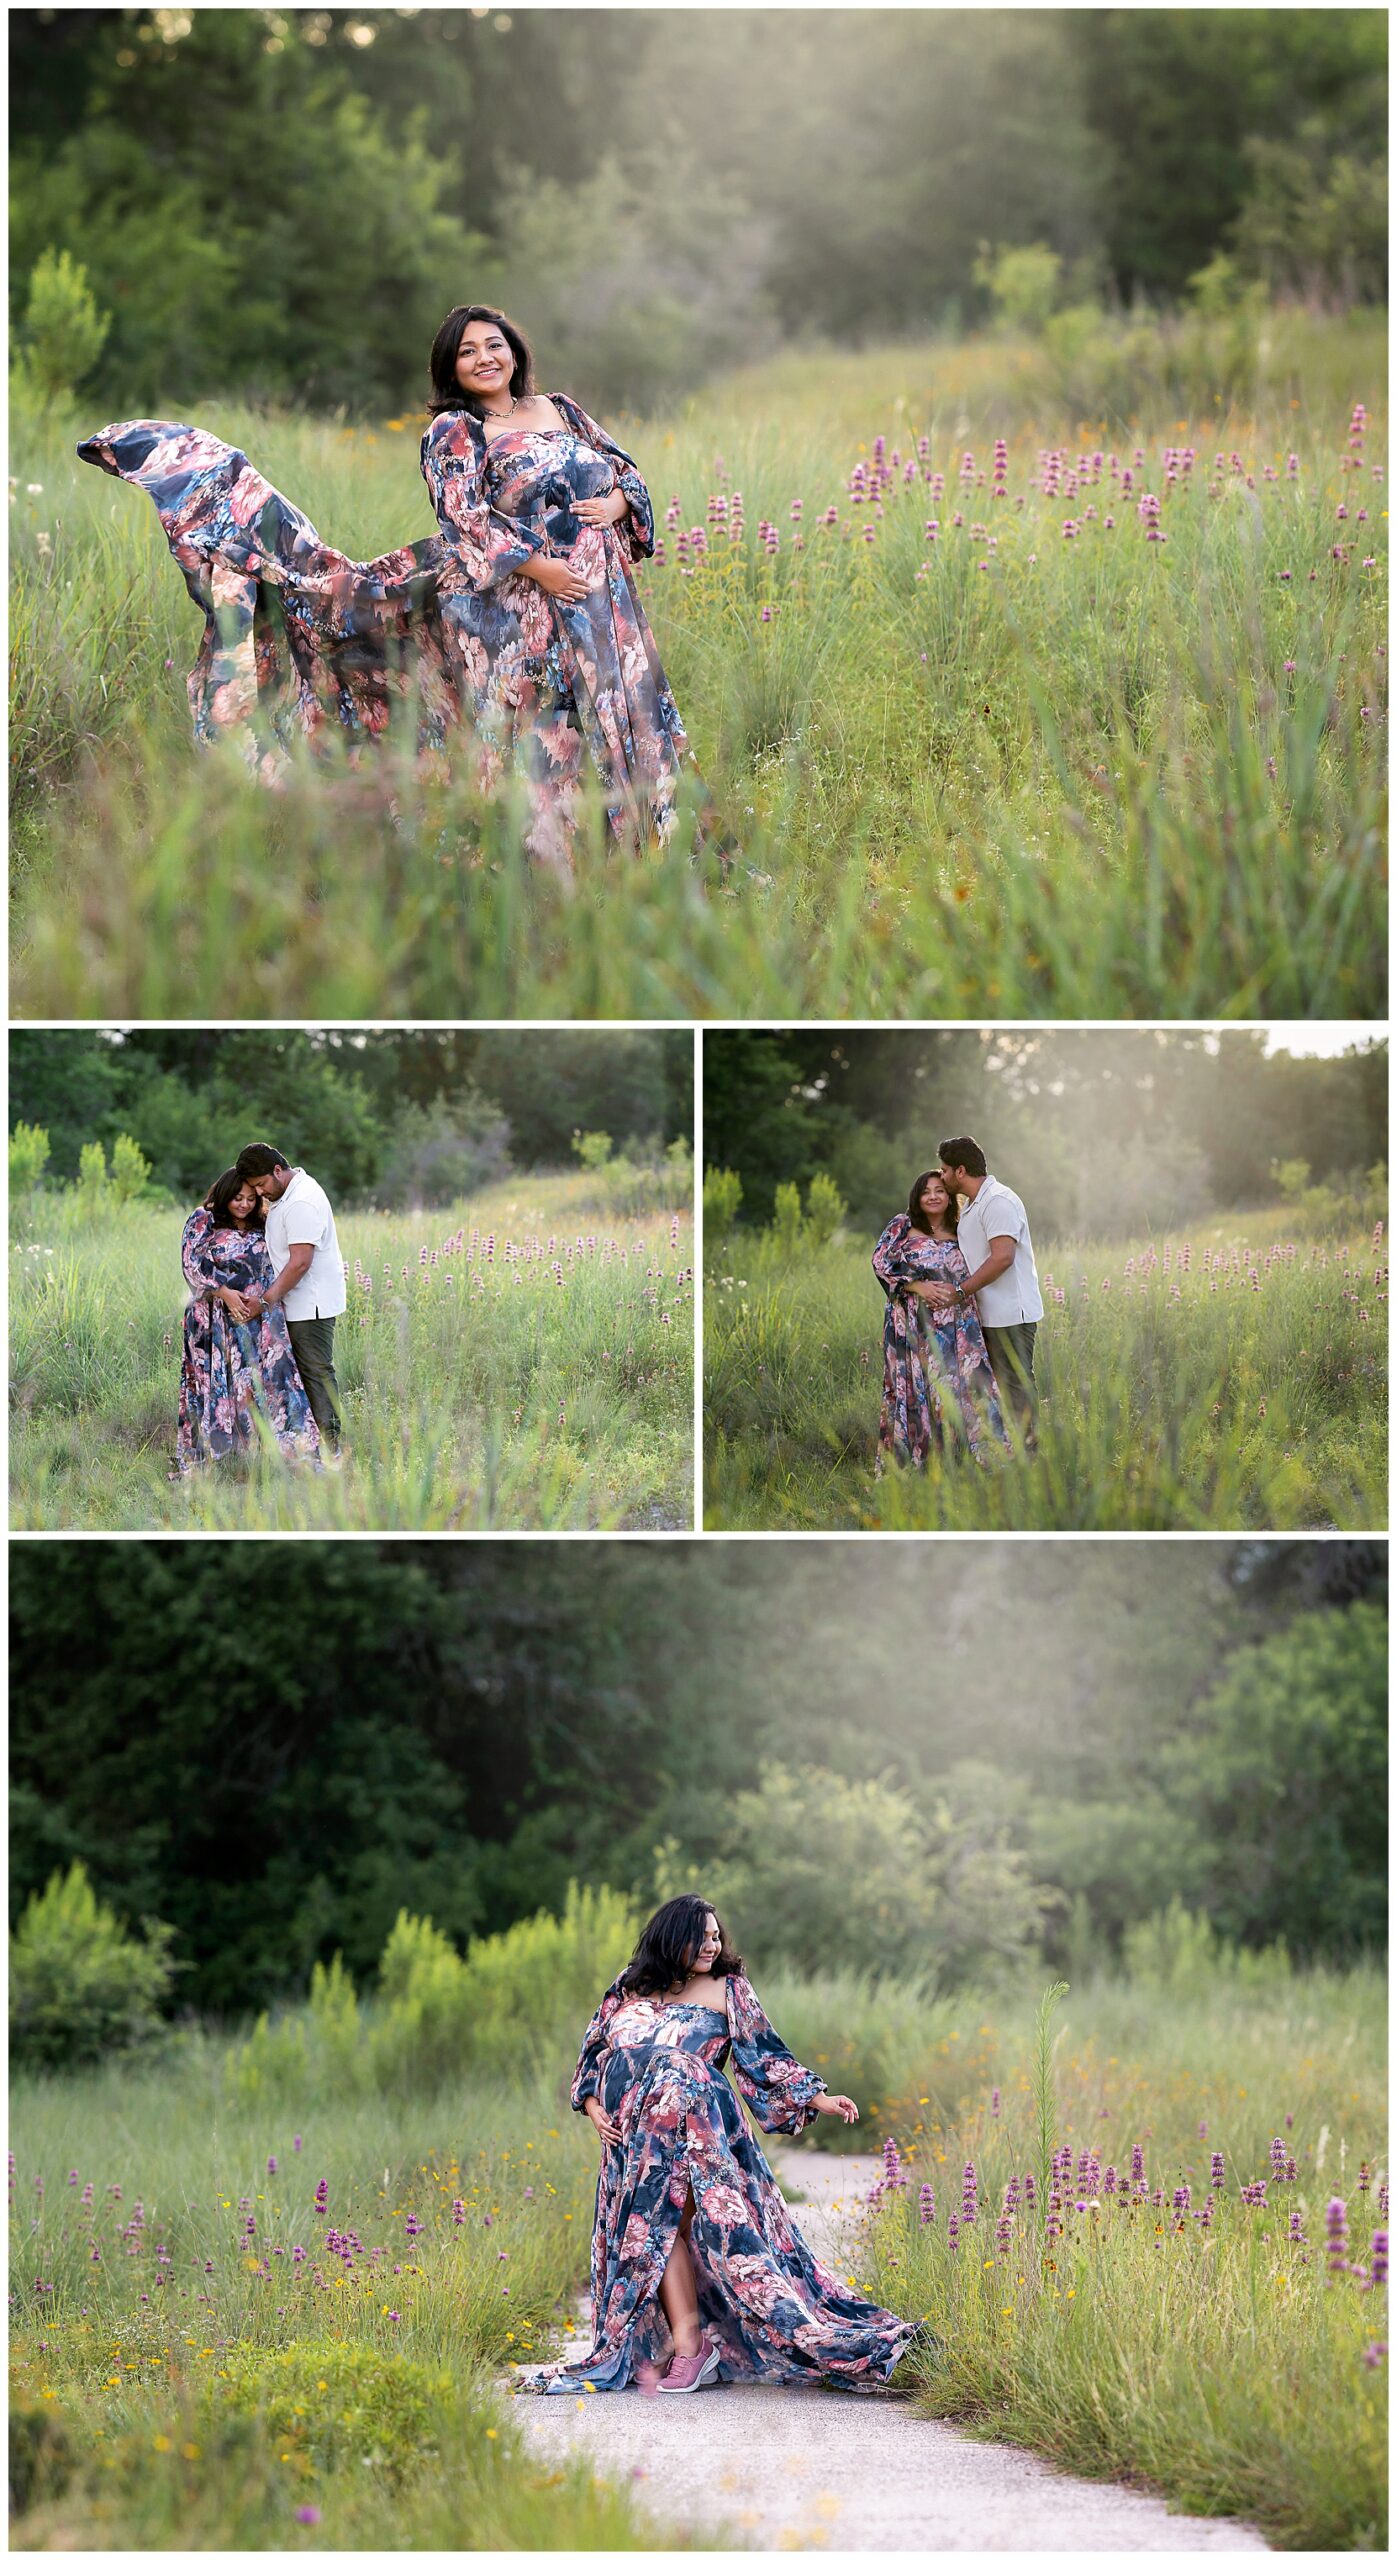 Texas wildflower maternity photo montage featuring a woman in a floral dress standing in a field surrounded by flowers and trees.